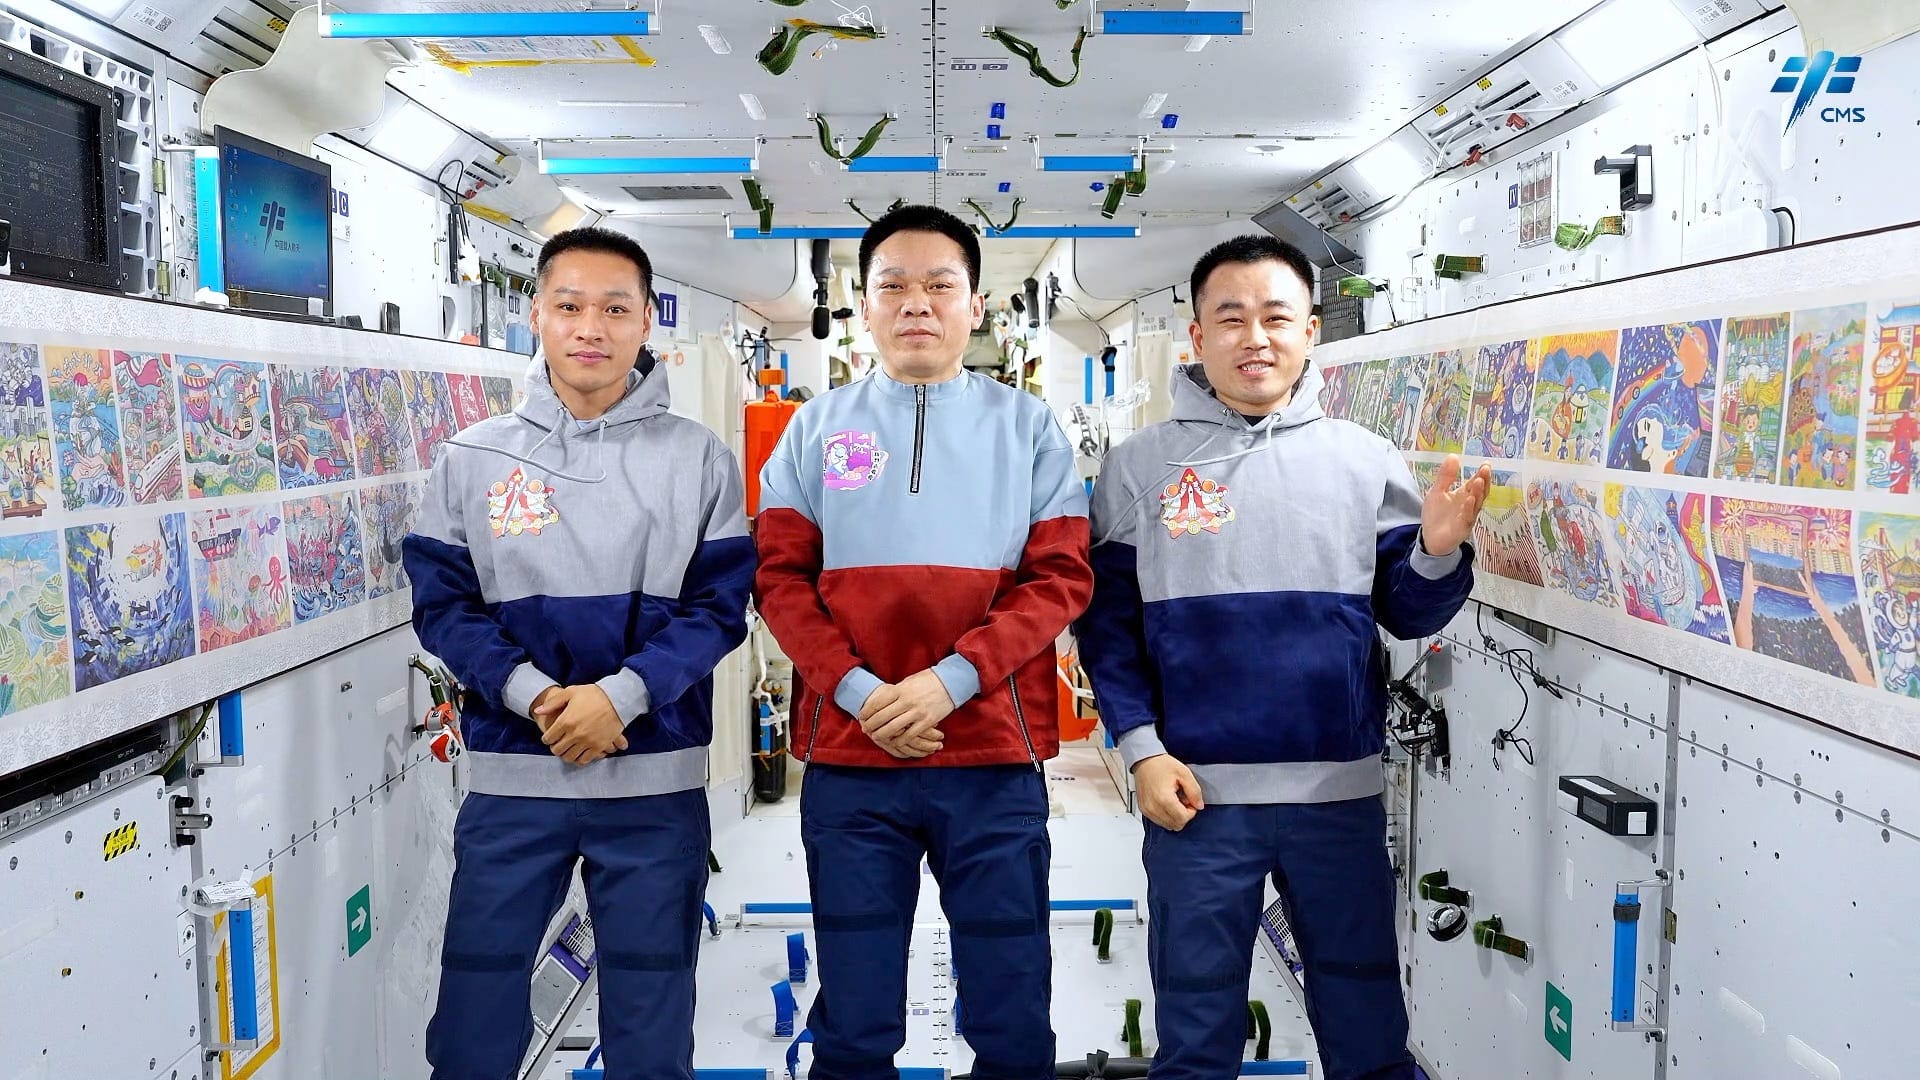 Jiang Xinlin (left), Tang Hongbo (center), and Tang Shengjie (right) during an art exhibition aboard the Tiangong Space Station. ©China Manned Space Agency